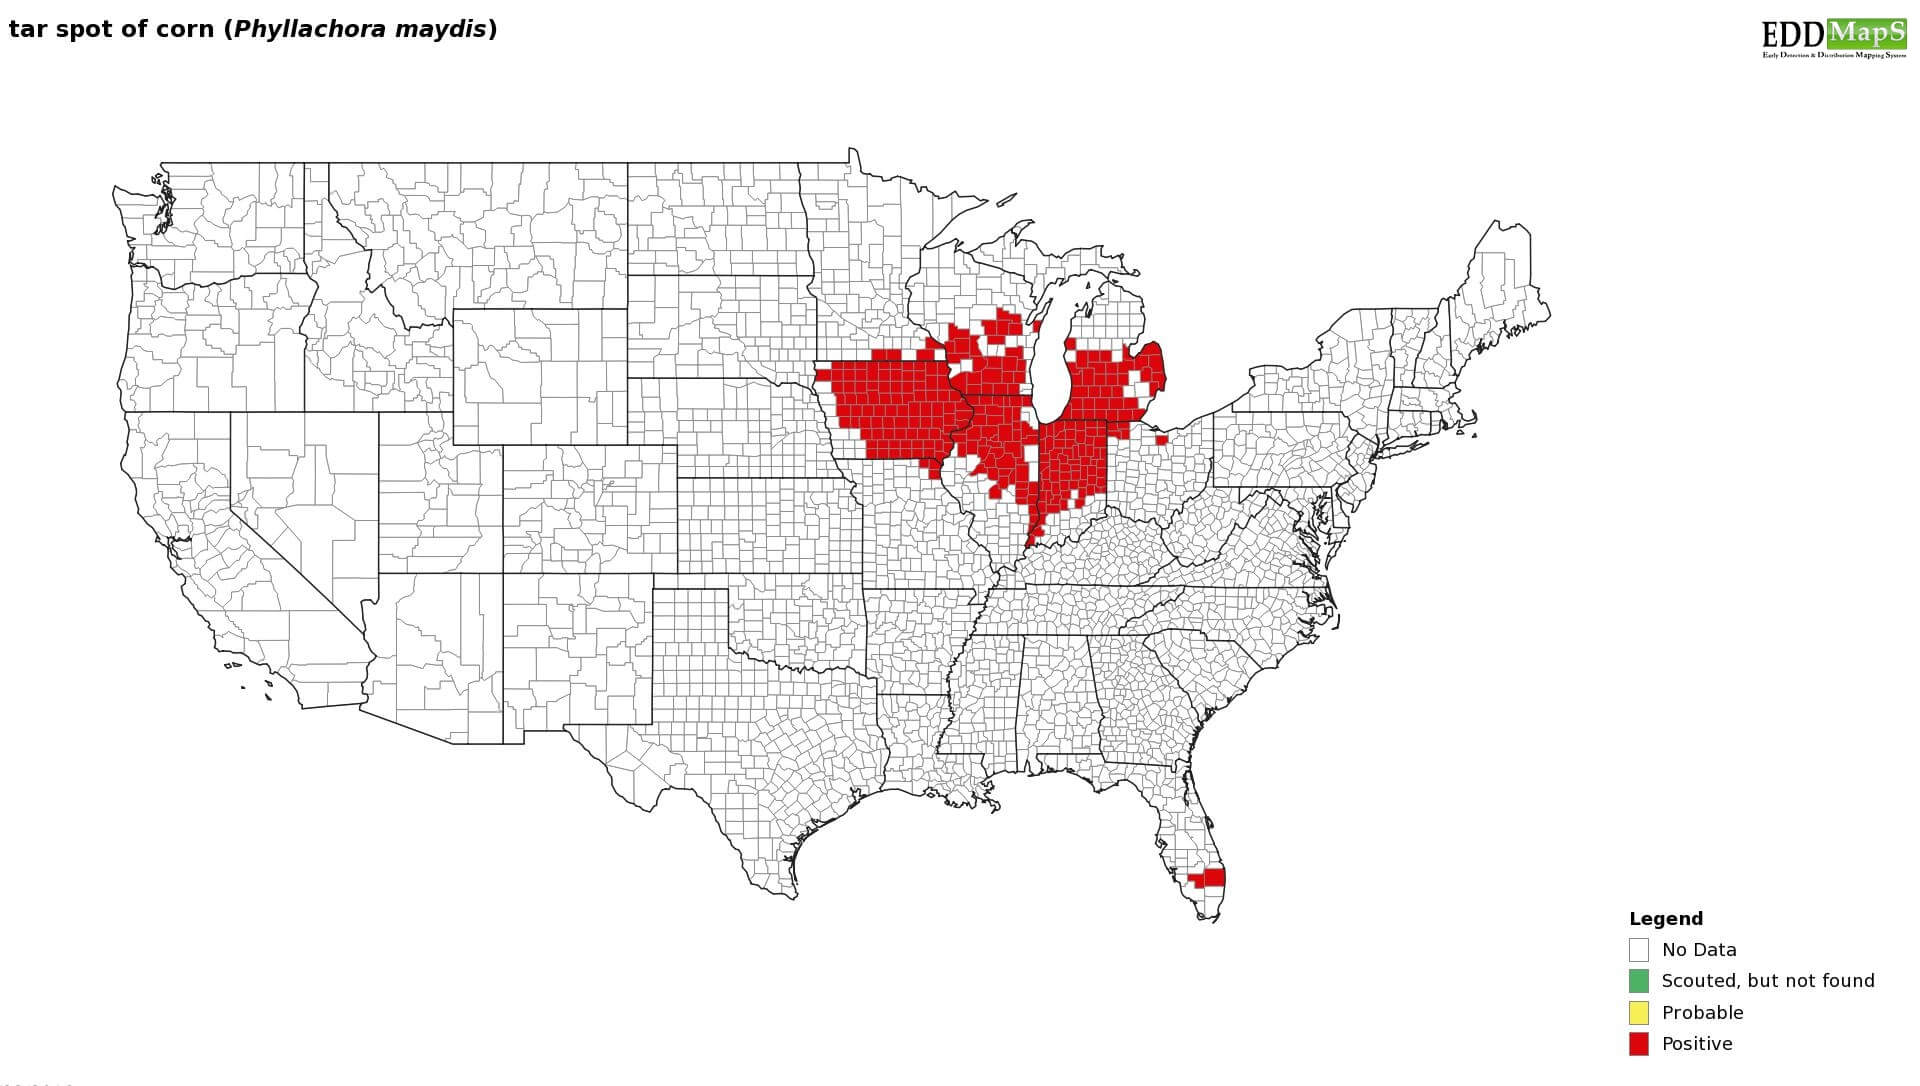 USA map shwing spots affected by tar